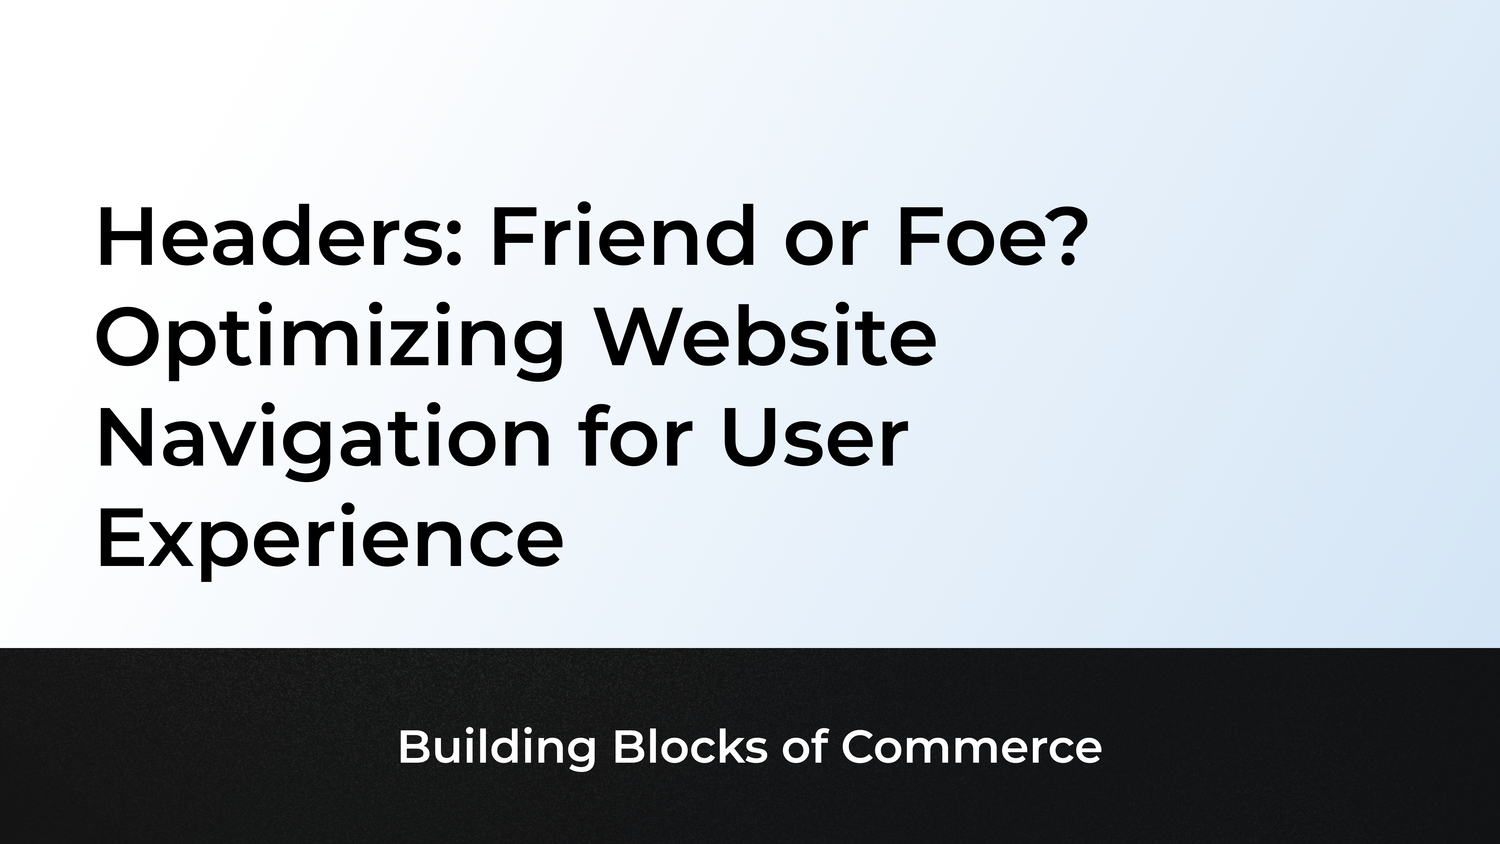 Headers: Friend or Foe? Optimizing Website Navigation for User Experience